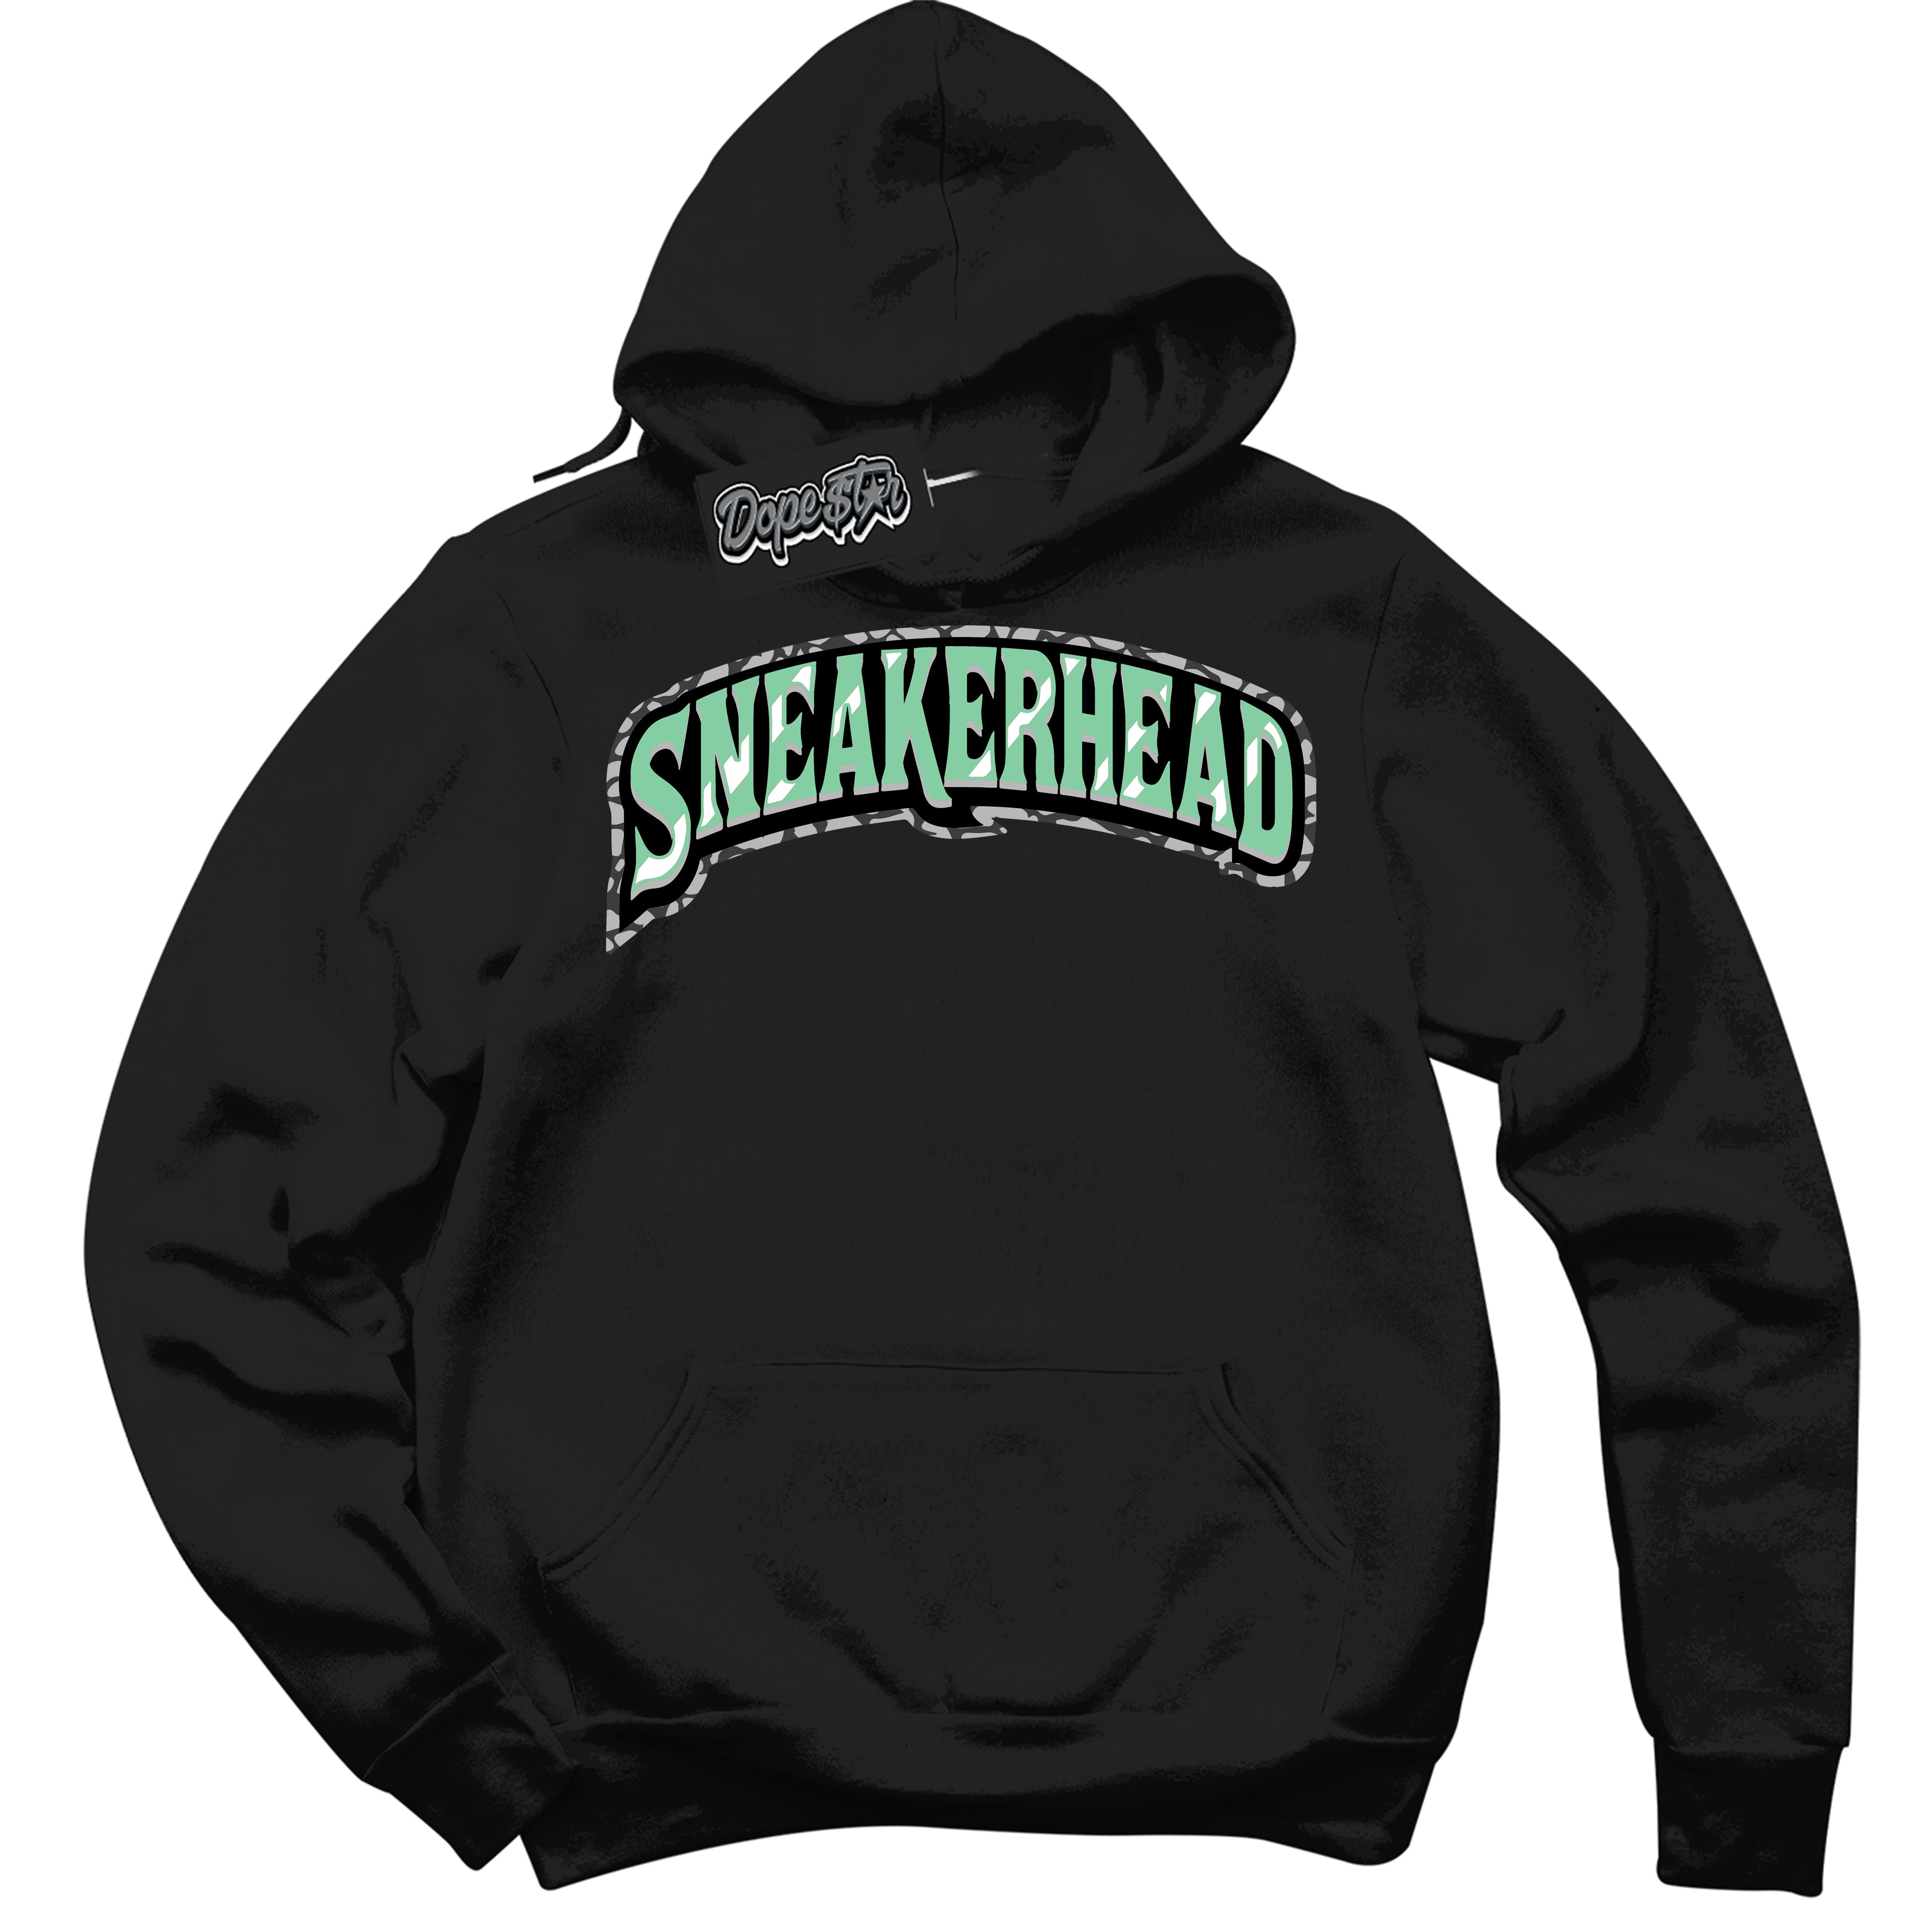 Cool Black Graphic DopeStar Hoodie with “ Sneakerhead “ print, that perfectly matches Green Glow 3S sneakers